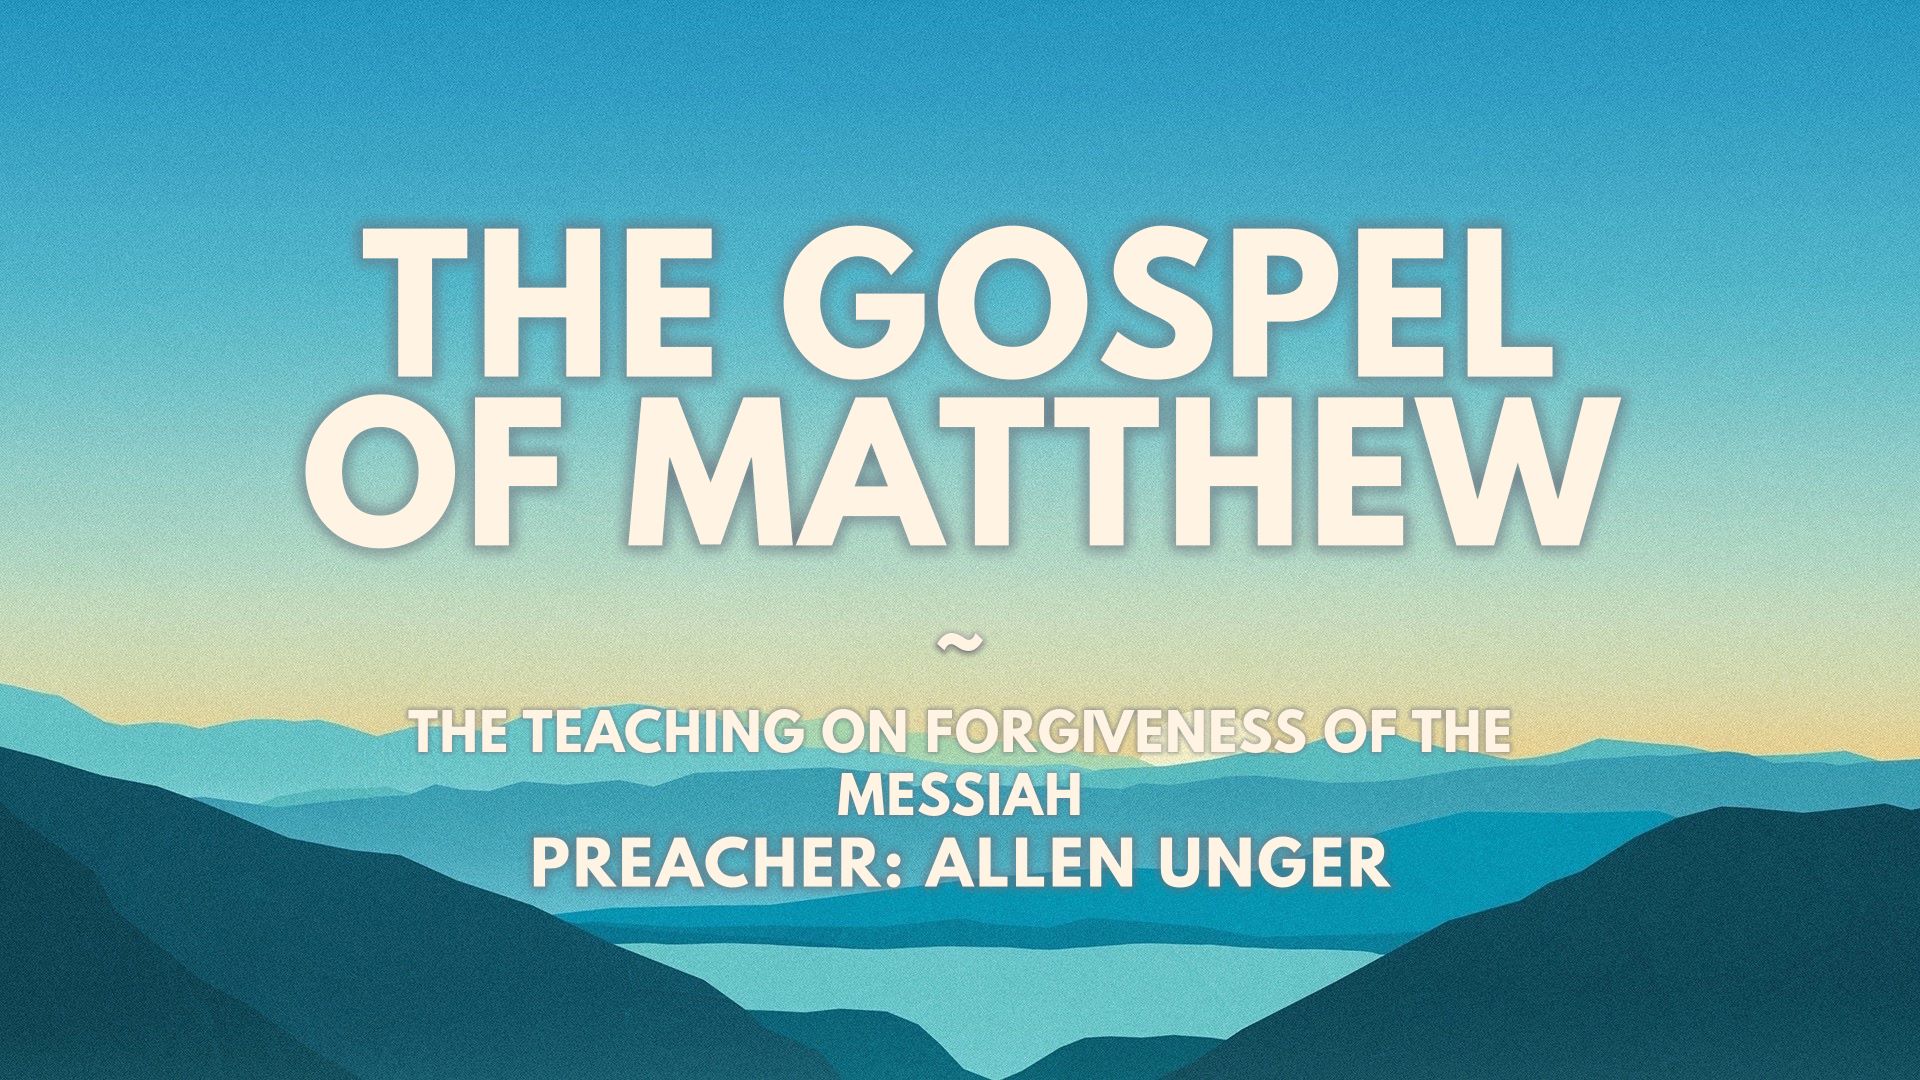 The Teaching on Forgiveness of the Messiah